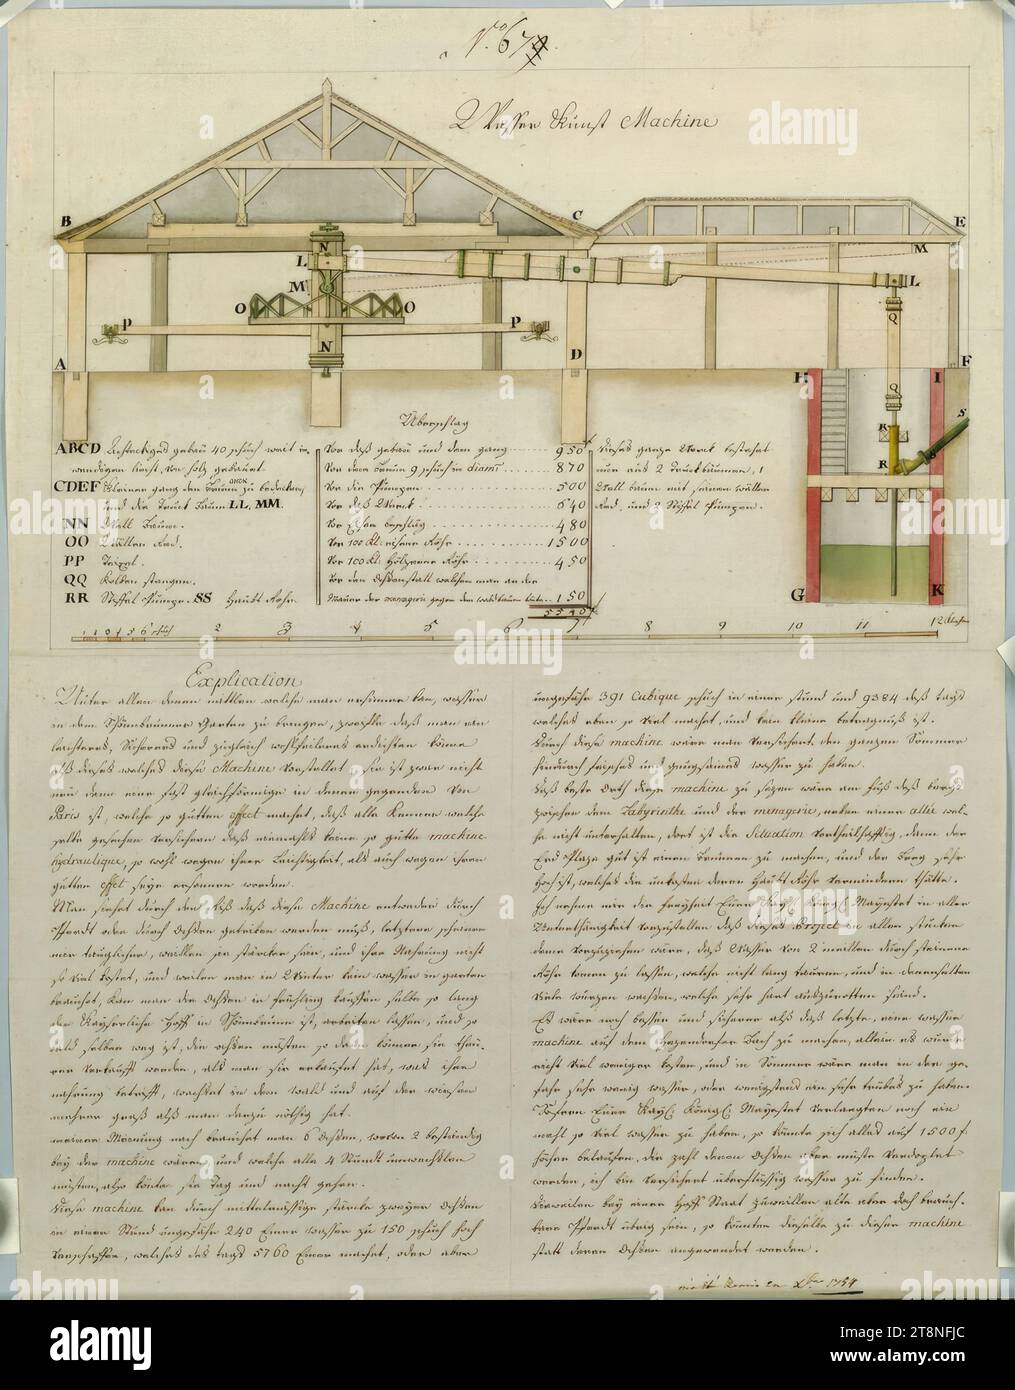 Vienna, Schönbrunn Palace, 'Water Art Machine', plan with cost accounting, indefinite, 1754, archival, paper, fine; pen drawing; Graphite design, grey, black and brown pen, multicolored wash, 47.7 x 36.3 cm Stock Photo